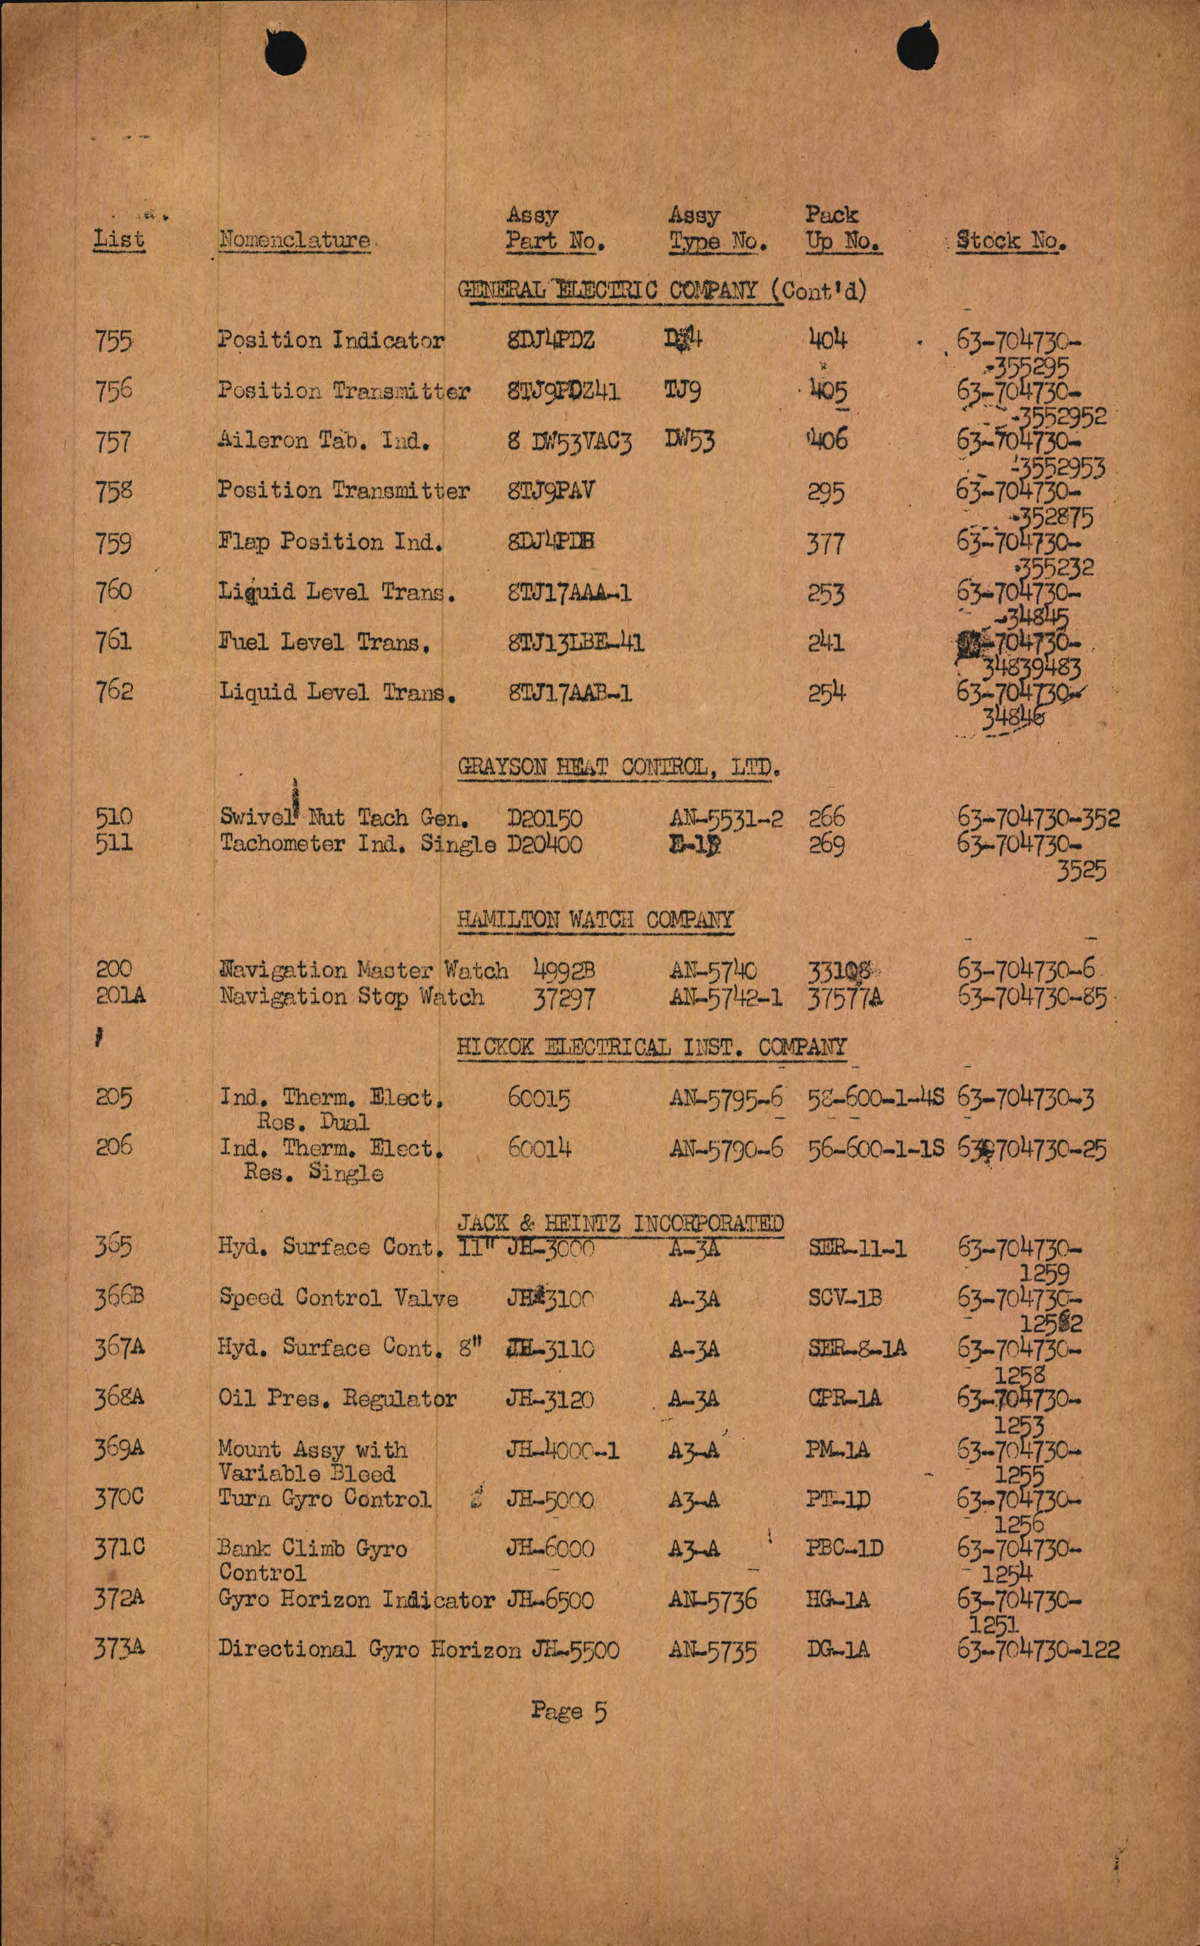 Sample page 8 from AirCorps Library document: Catalog of Instrument Overhaul Pack-Up Lists and Replacement Parts for Navigation, Flight, and Engine Instruments